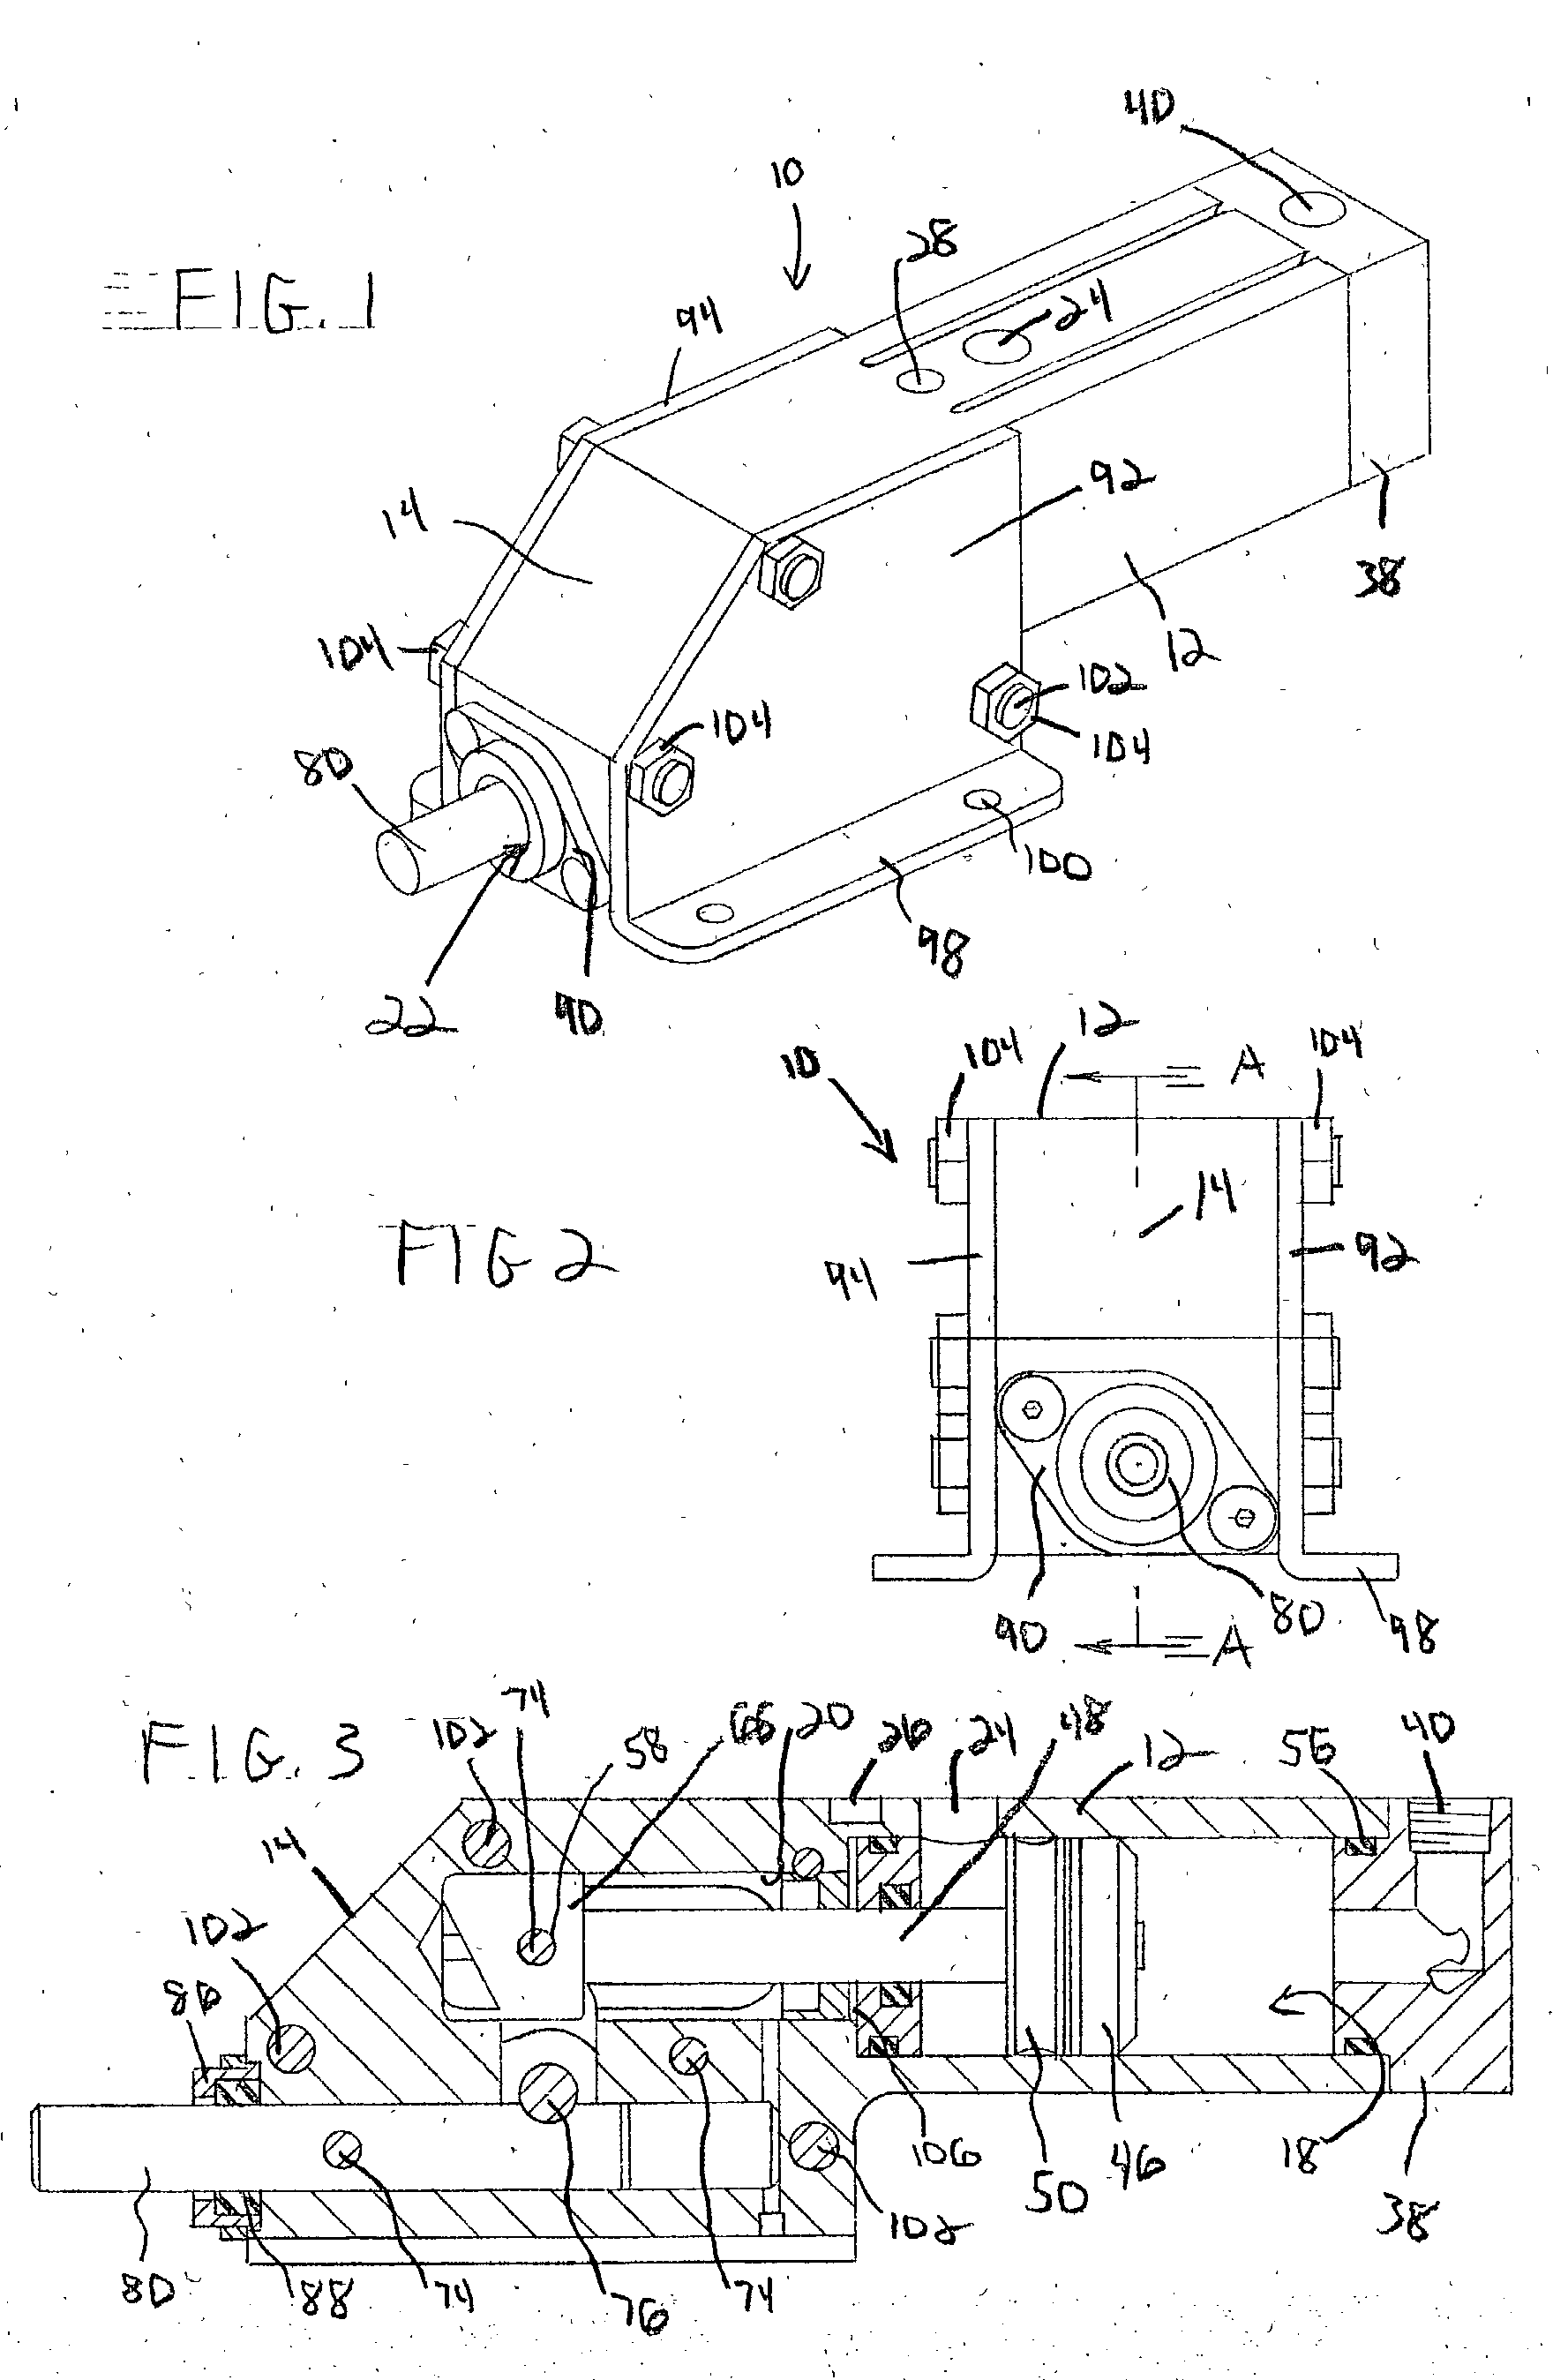 Enclosed power clamp